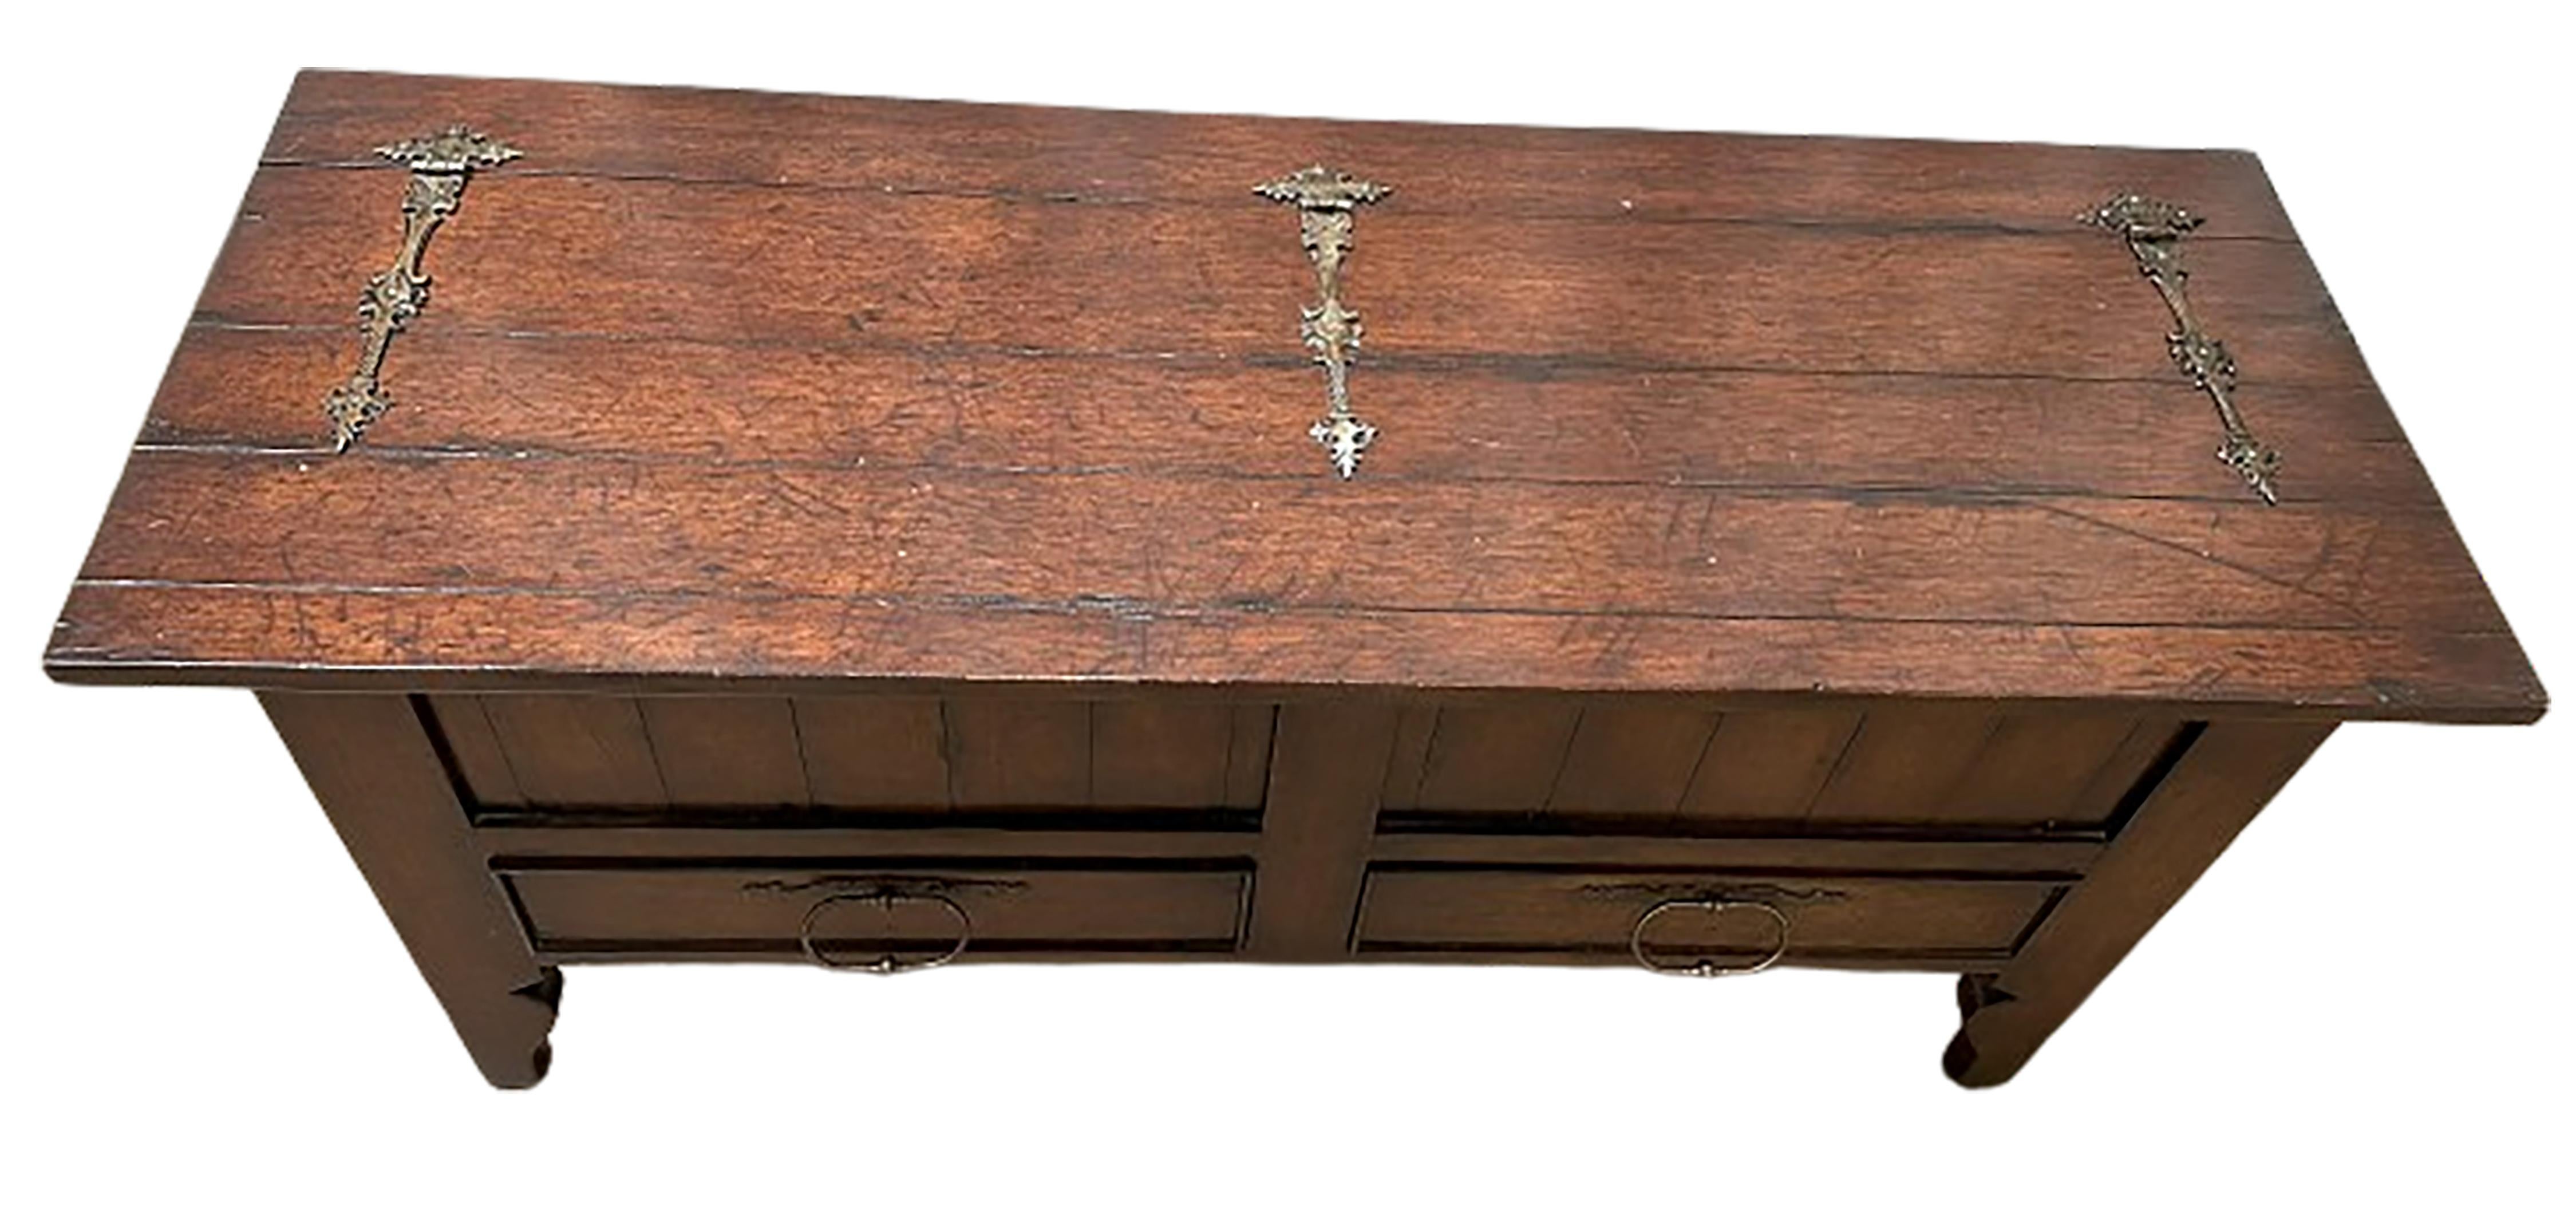 A handsome 19th century style walnut chest. Top opens up. Three brass hinges on the top. Brass handles included on lower drawers as well. 

In very good condition. Some gentle wear consistent with age and use.

No obvious markings on the piece.